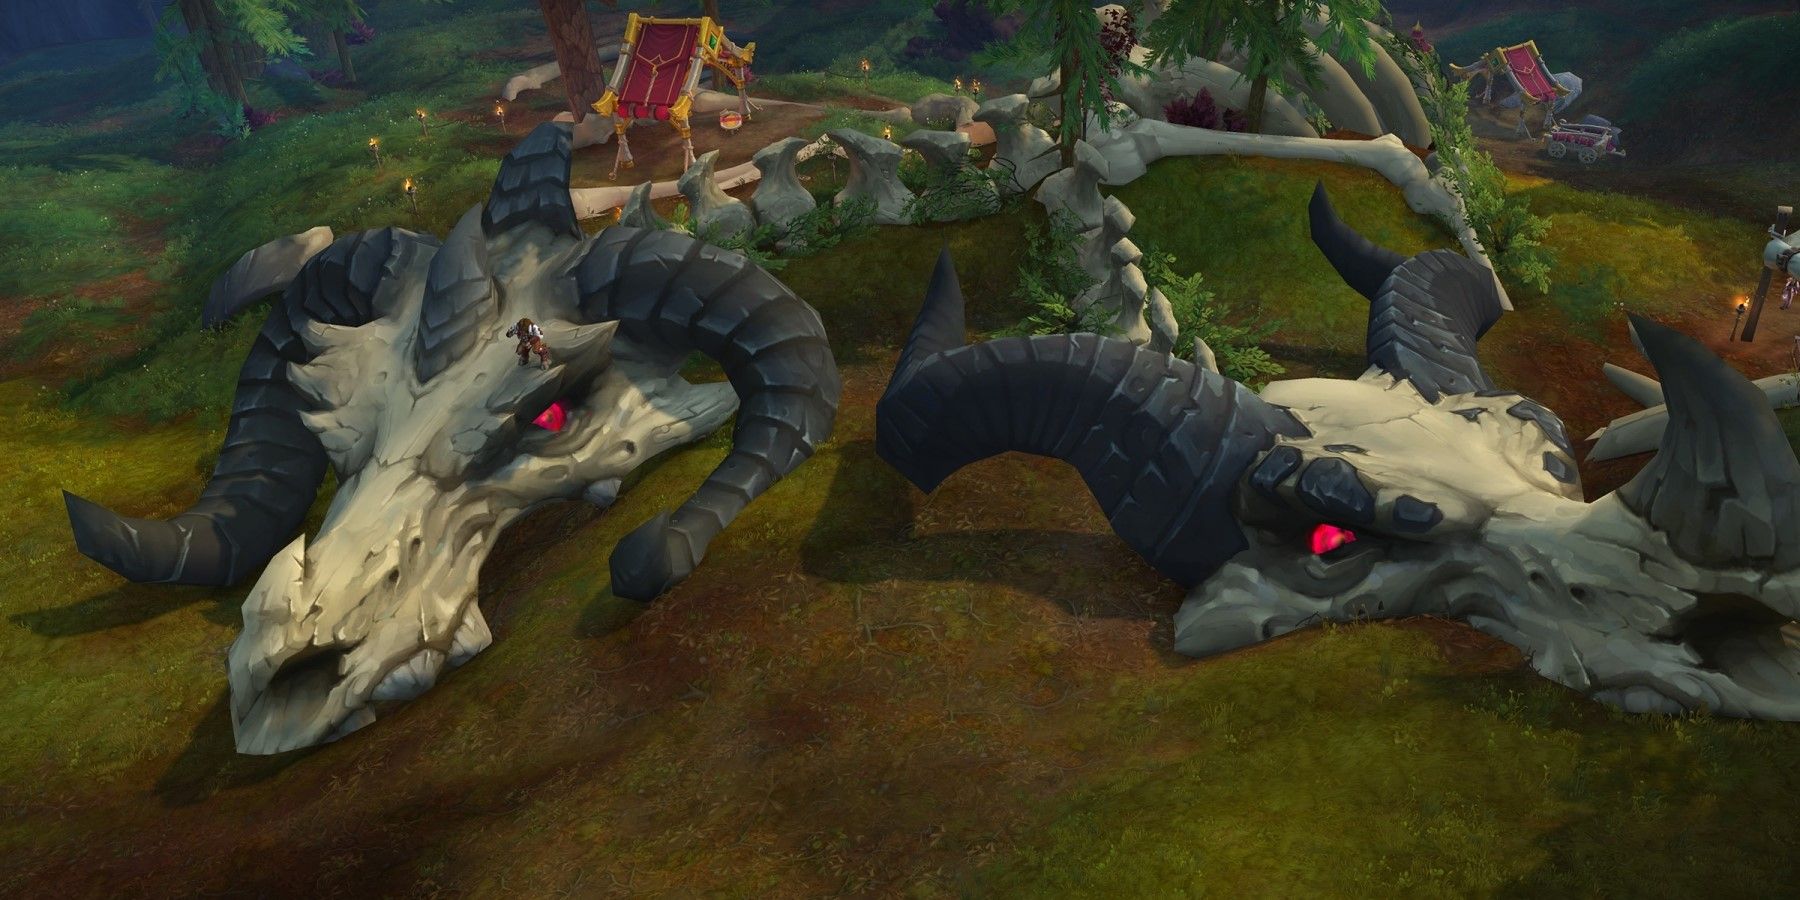 world of warcraft reveals new public event in patch 10.2.5